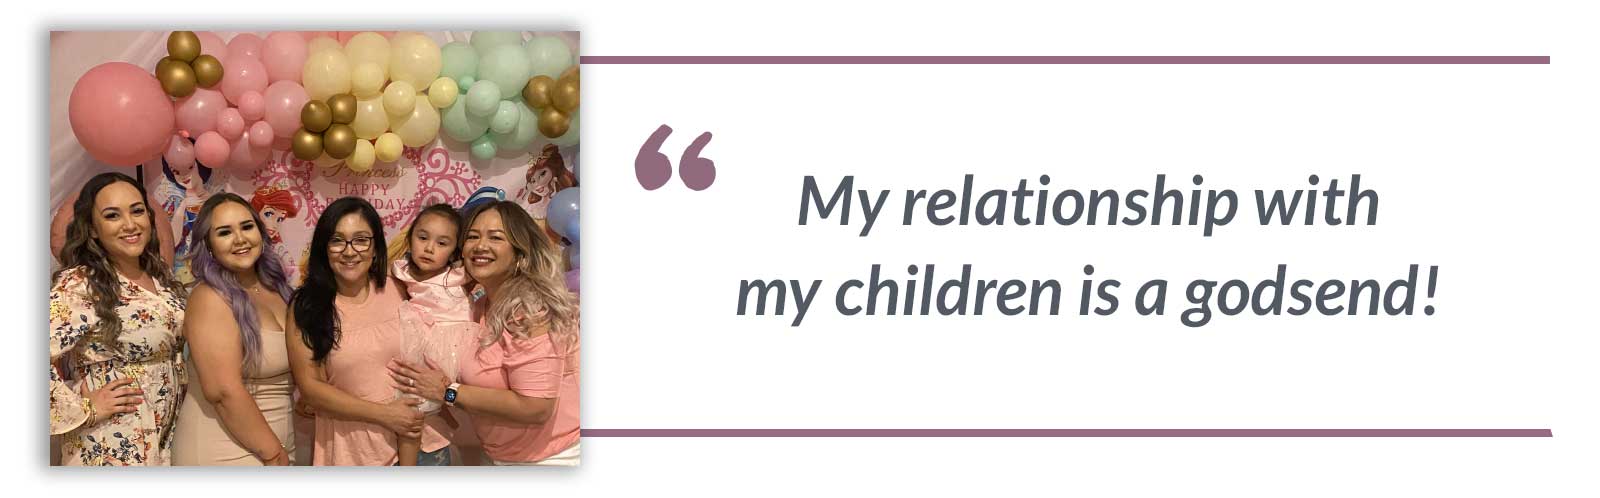 My relationship with my children is a godsend!-Maria